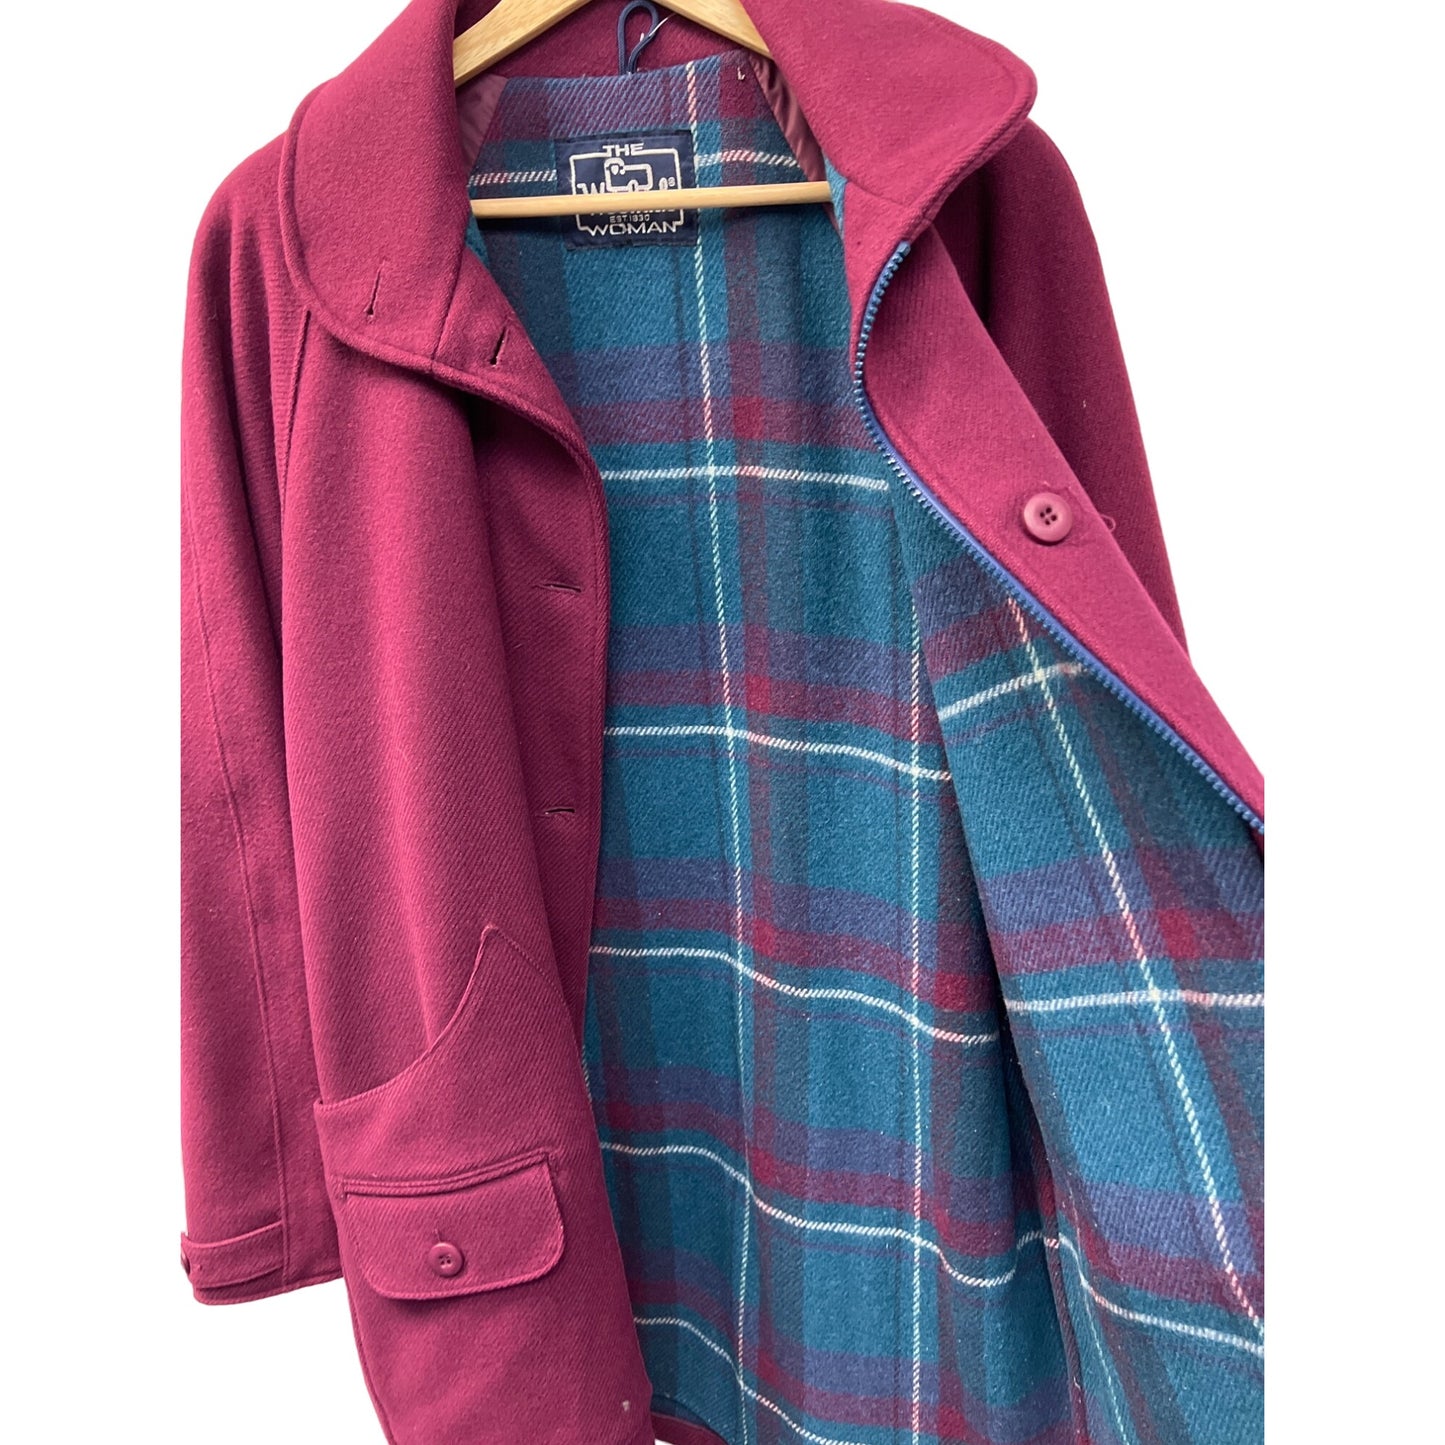 Woolrich "The Woolrich Woman" Vintage Purple and Plaid Blanket Lined Chore Coat